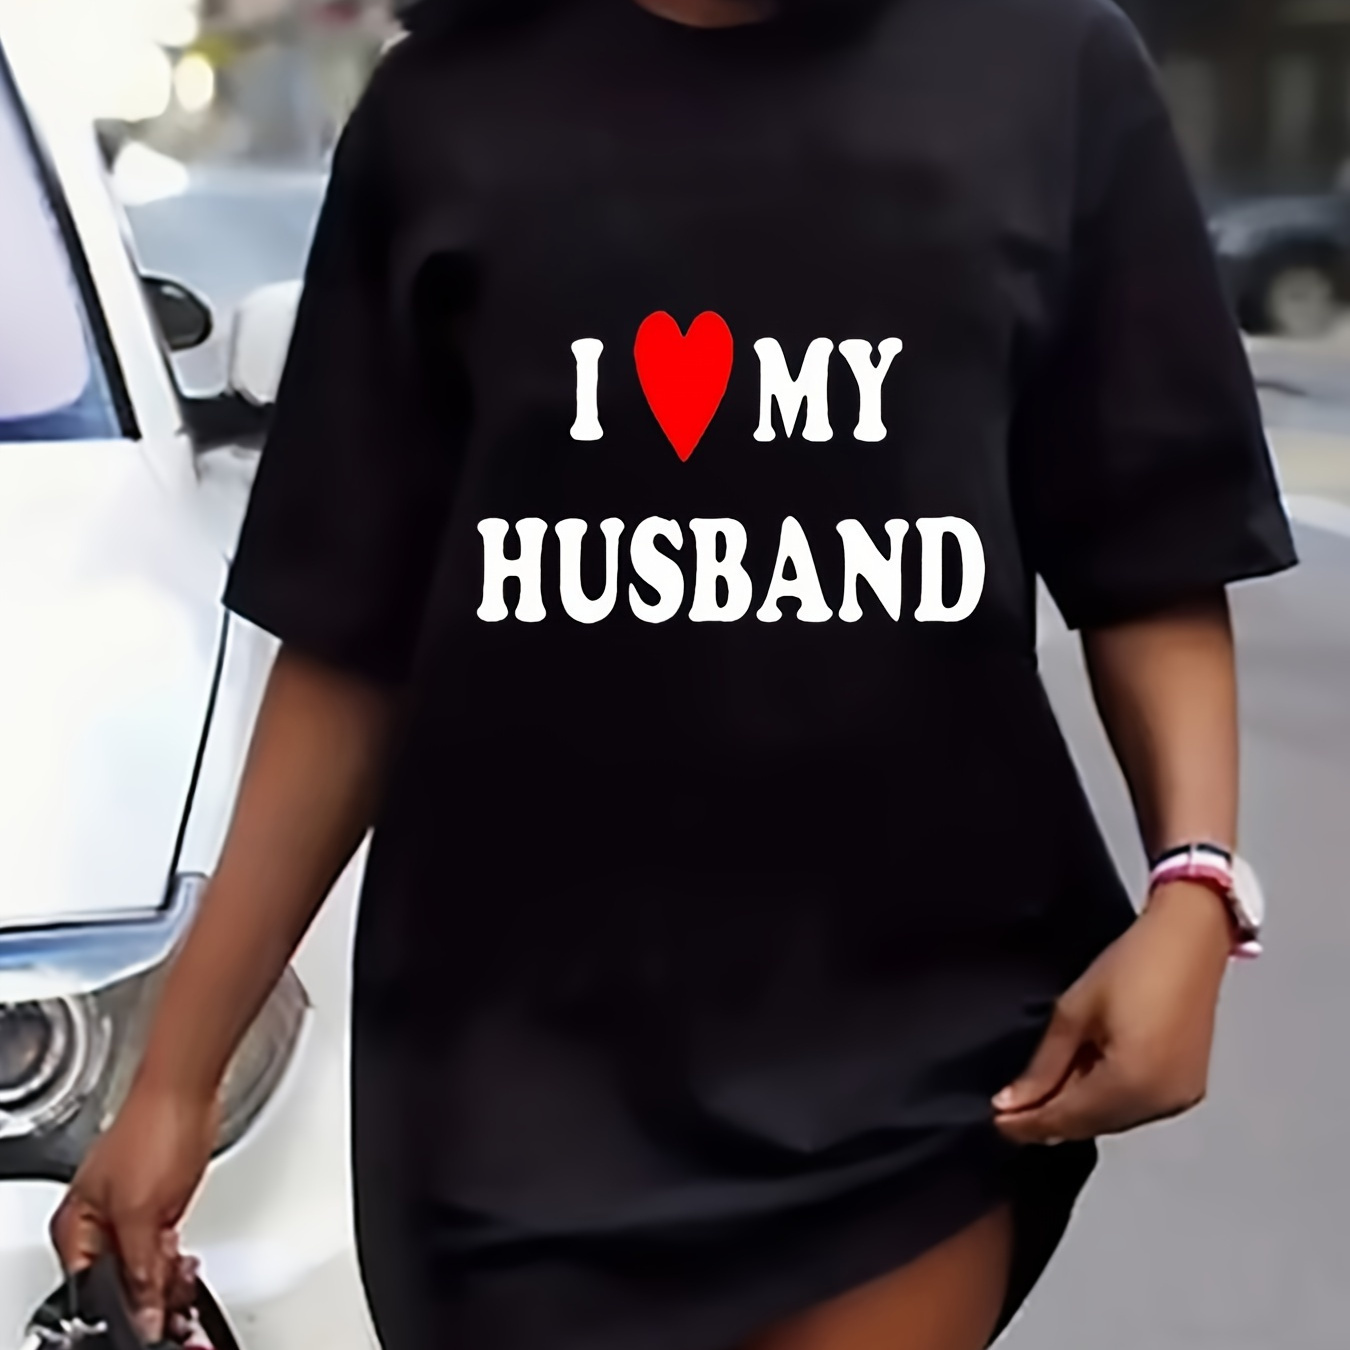 

I Love My Husband Print Dress, Short Sleeve Crew Neck Casual Dress For Summer & Spring, Women's Clothing